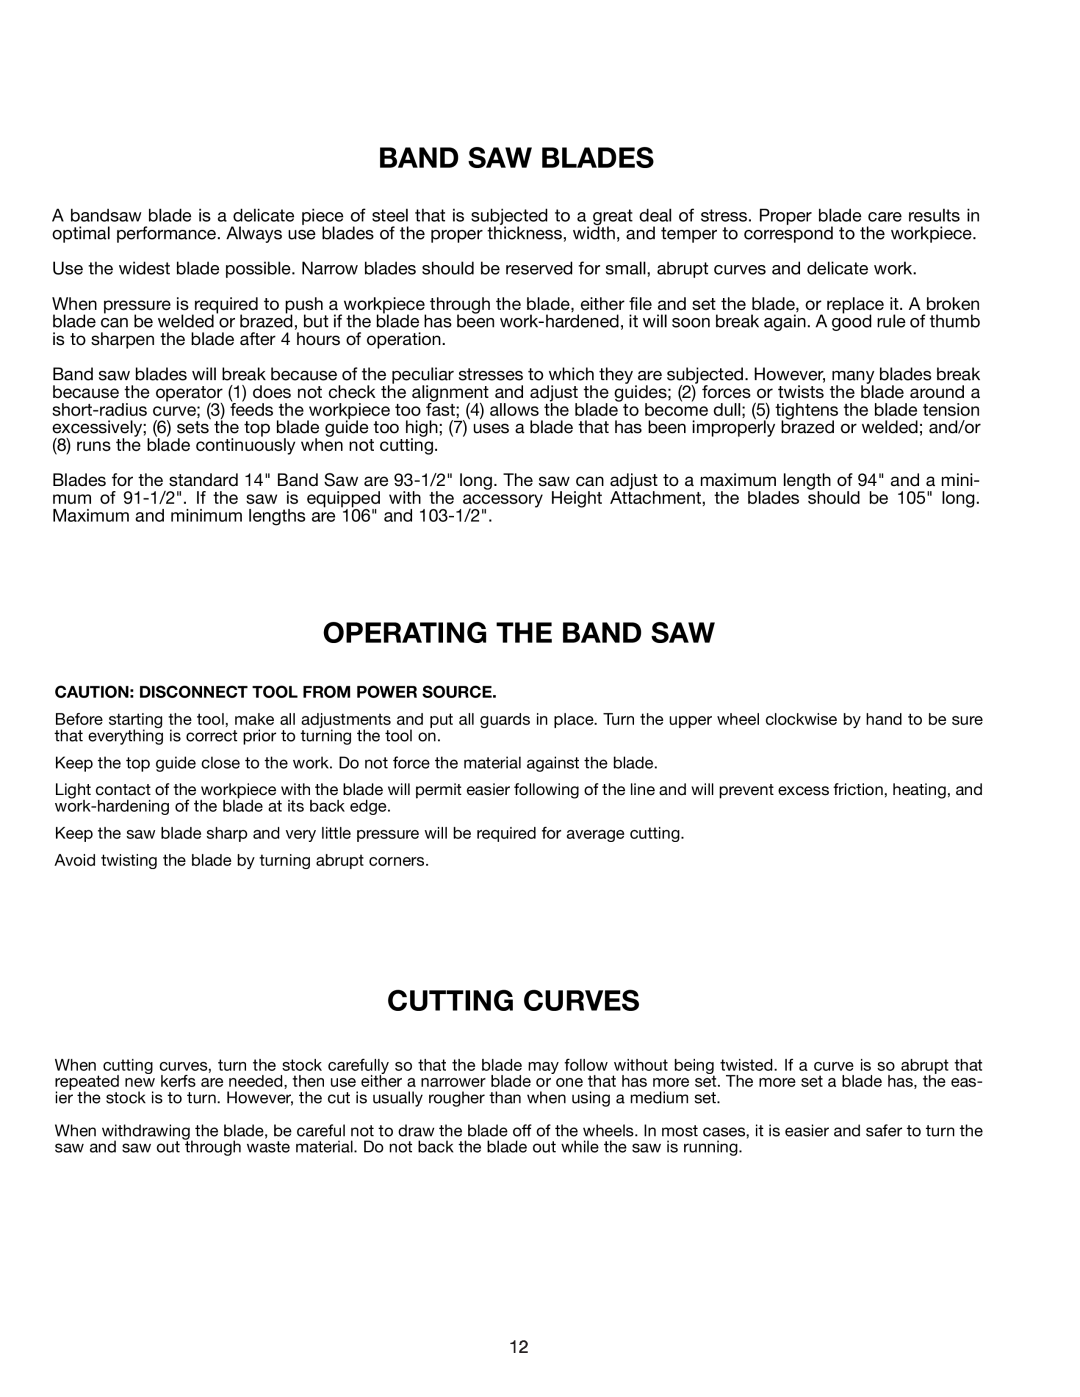 Delta 28-299A, 28-241 instruction manual Band Saw Blades, Operating The Band Saw, Cutting Curves 